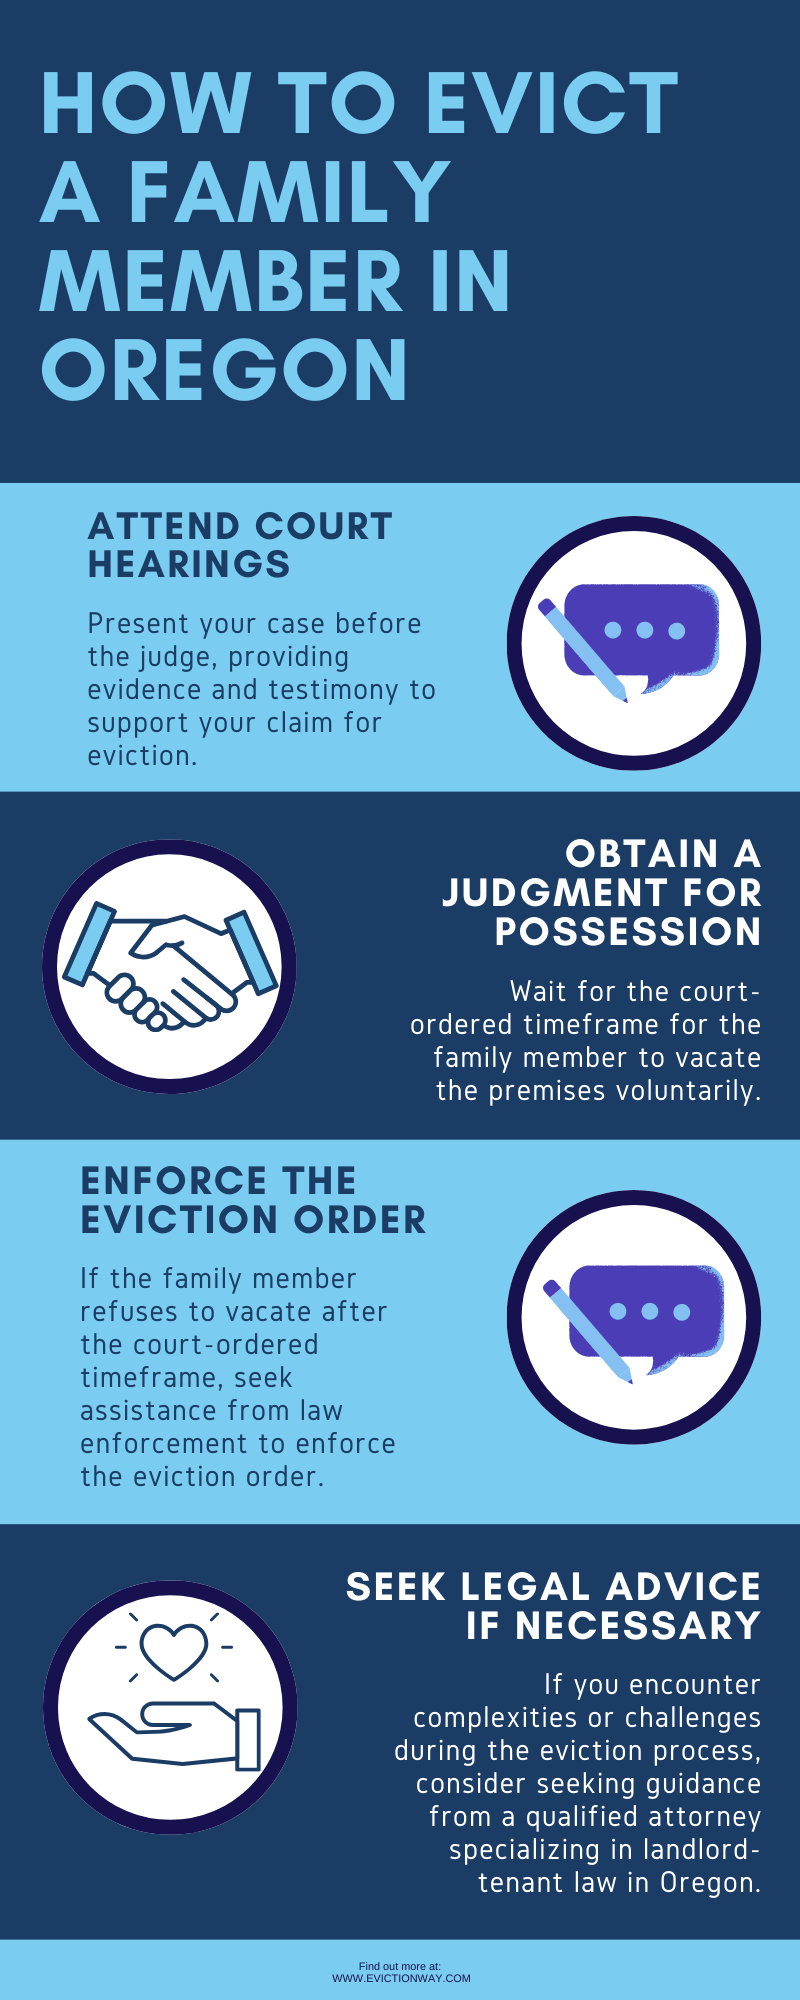 How to Evict a Family Member in Oregon